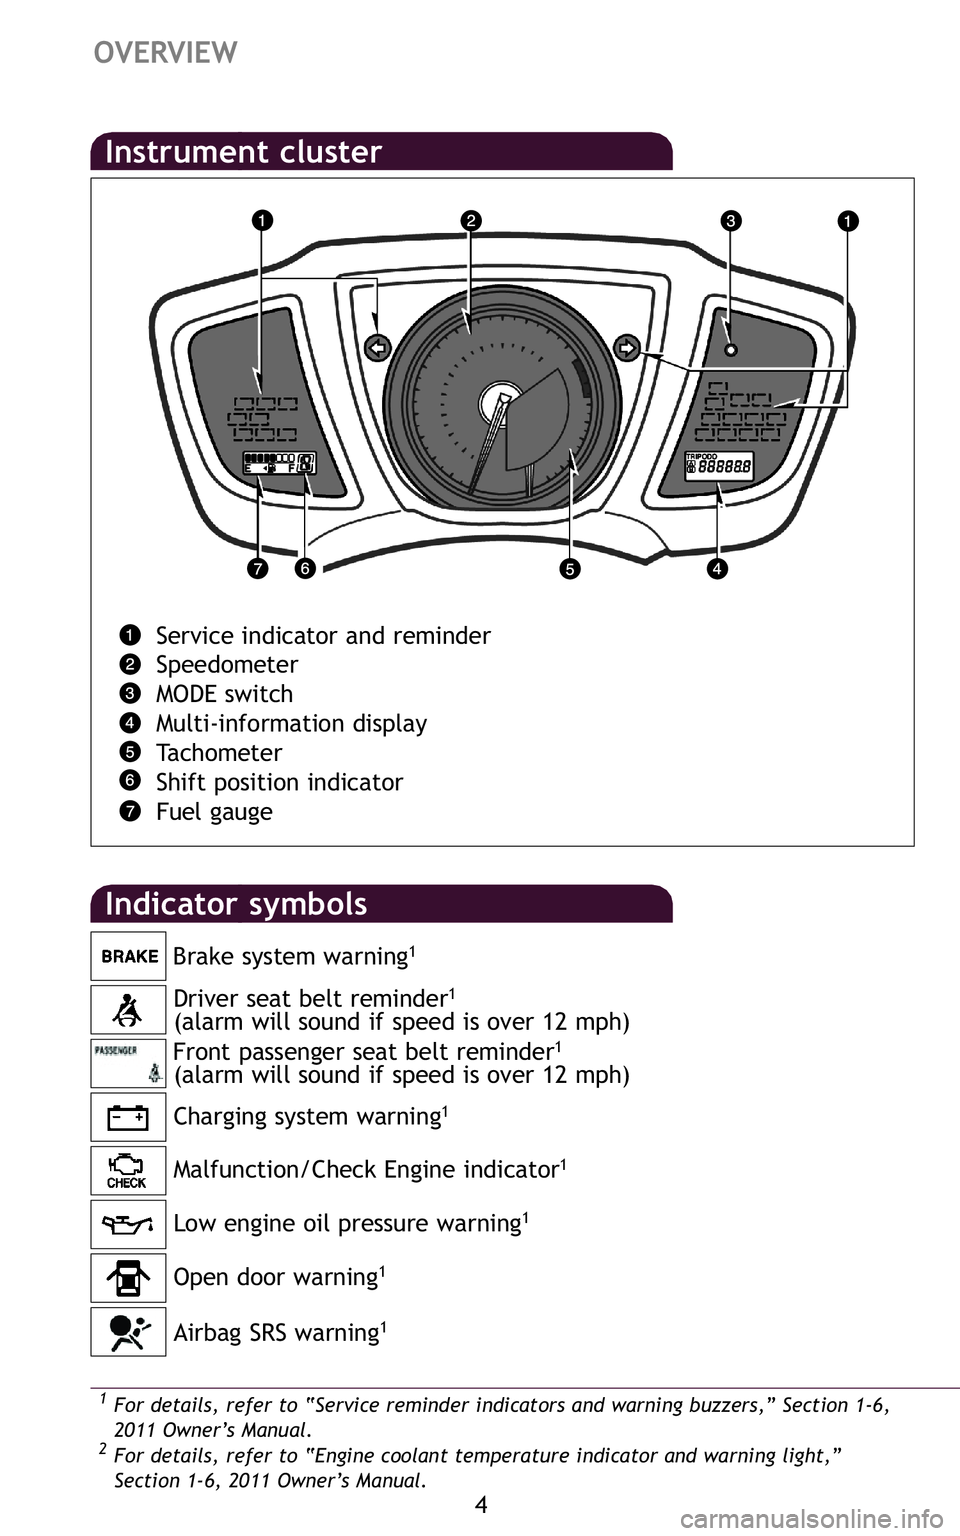 TOYOTA xD 2011  Owners Manual (in English) 4
OVERVIEW
Lowengine oilpressure warning1
Driverseatbeltreminder1
(alarm willsound ifspeed isover 1\fmph)
Front passenger seatbeltreminder1
(alarm willsound ifspeed isover 1\fmph)
Brake
system warning